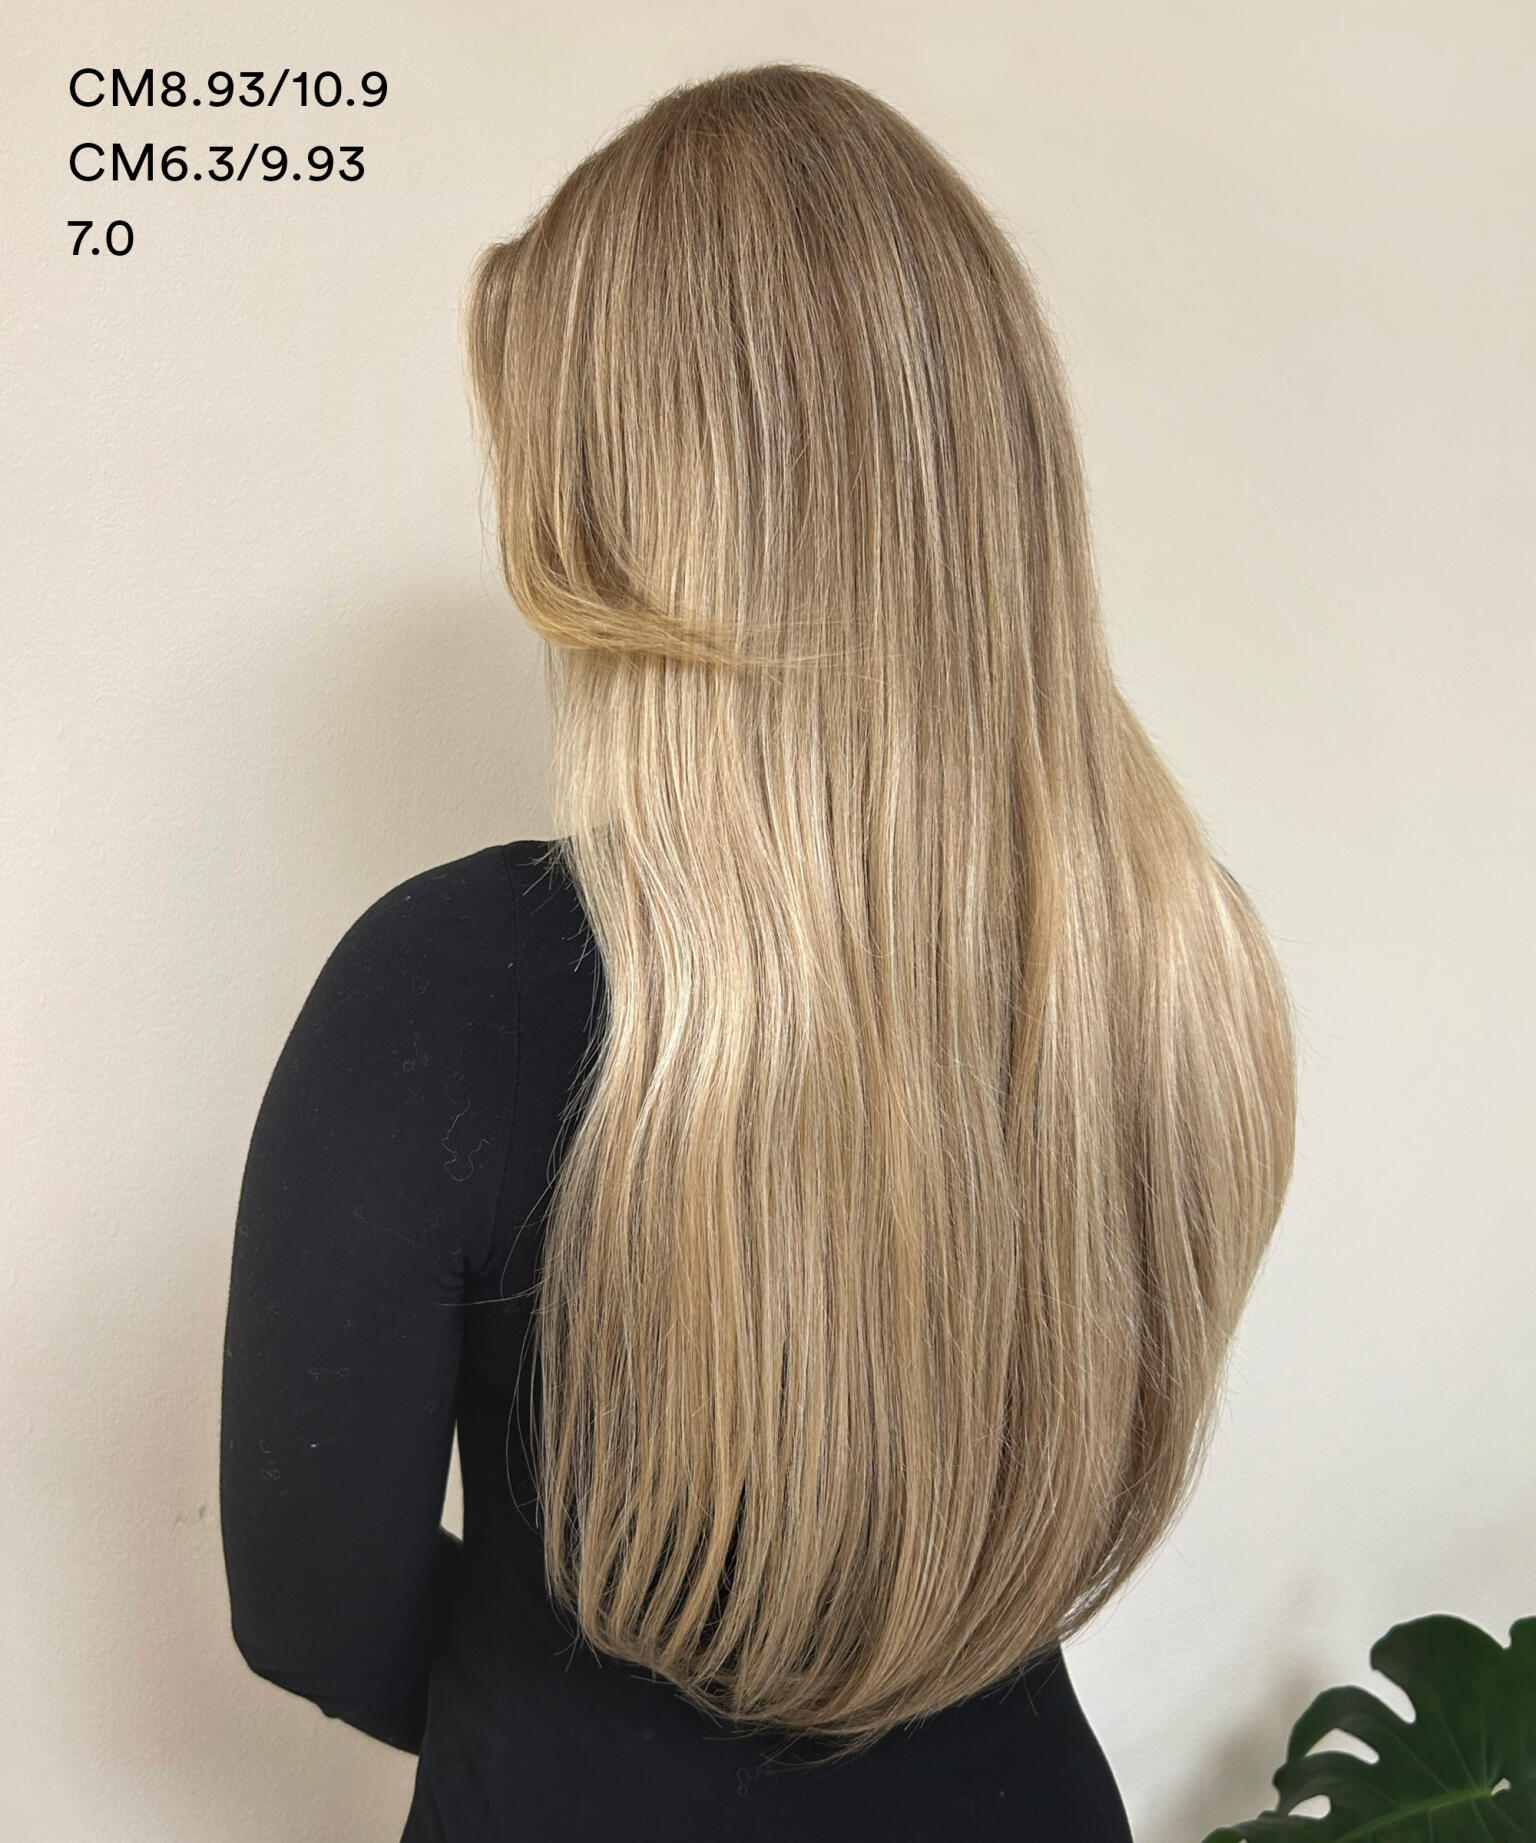 Luxe Tape Extensions Seamless 3 CM8.93/10.9 40 cm